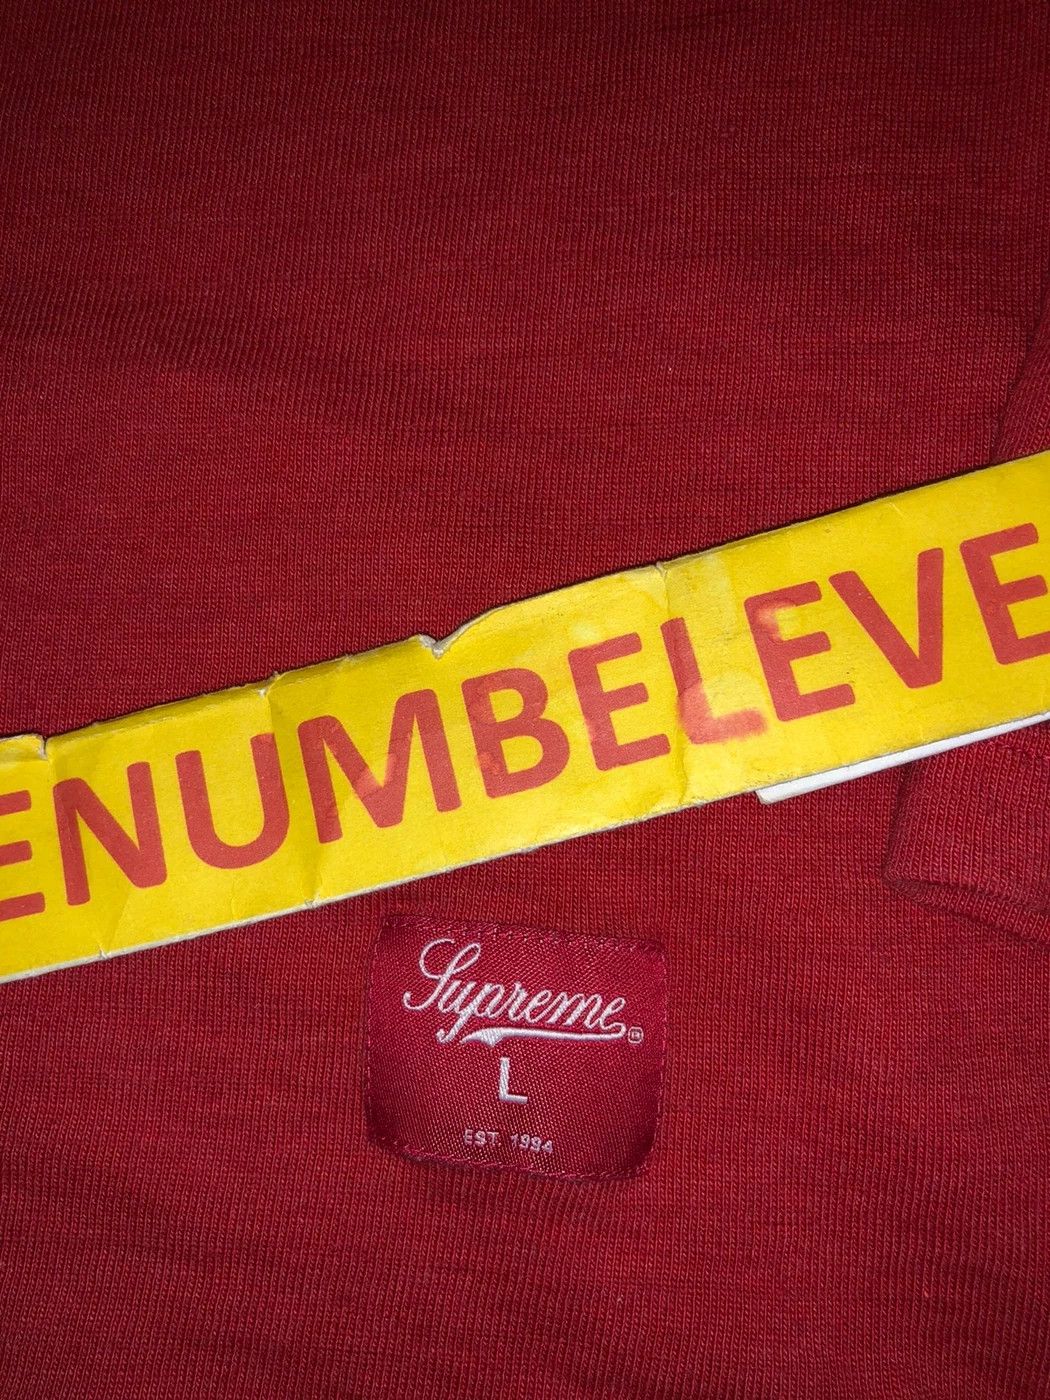 Supreme Supreme Football Long sleeve 2011 large 11 used Size US L / EU 52-54 / 3 - 7 Preview